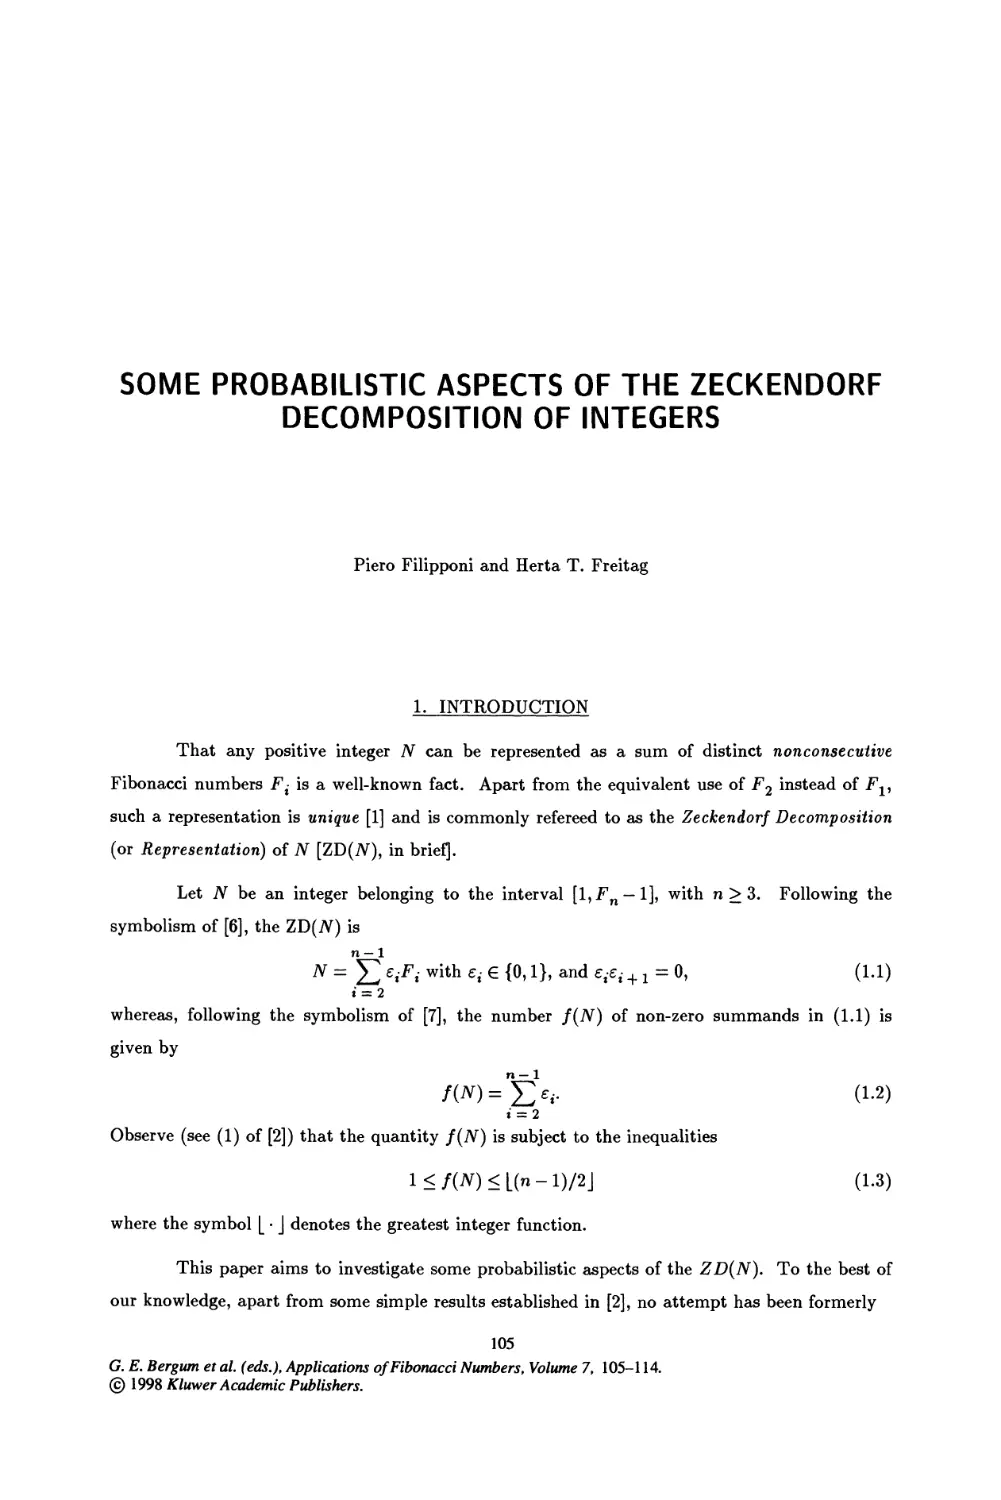 14. Some Probabilistic Aspects of the Zeckendorf Decomposition of Integers